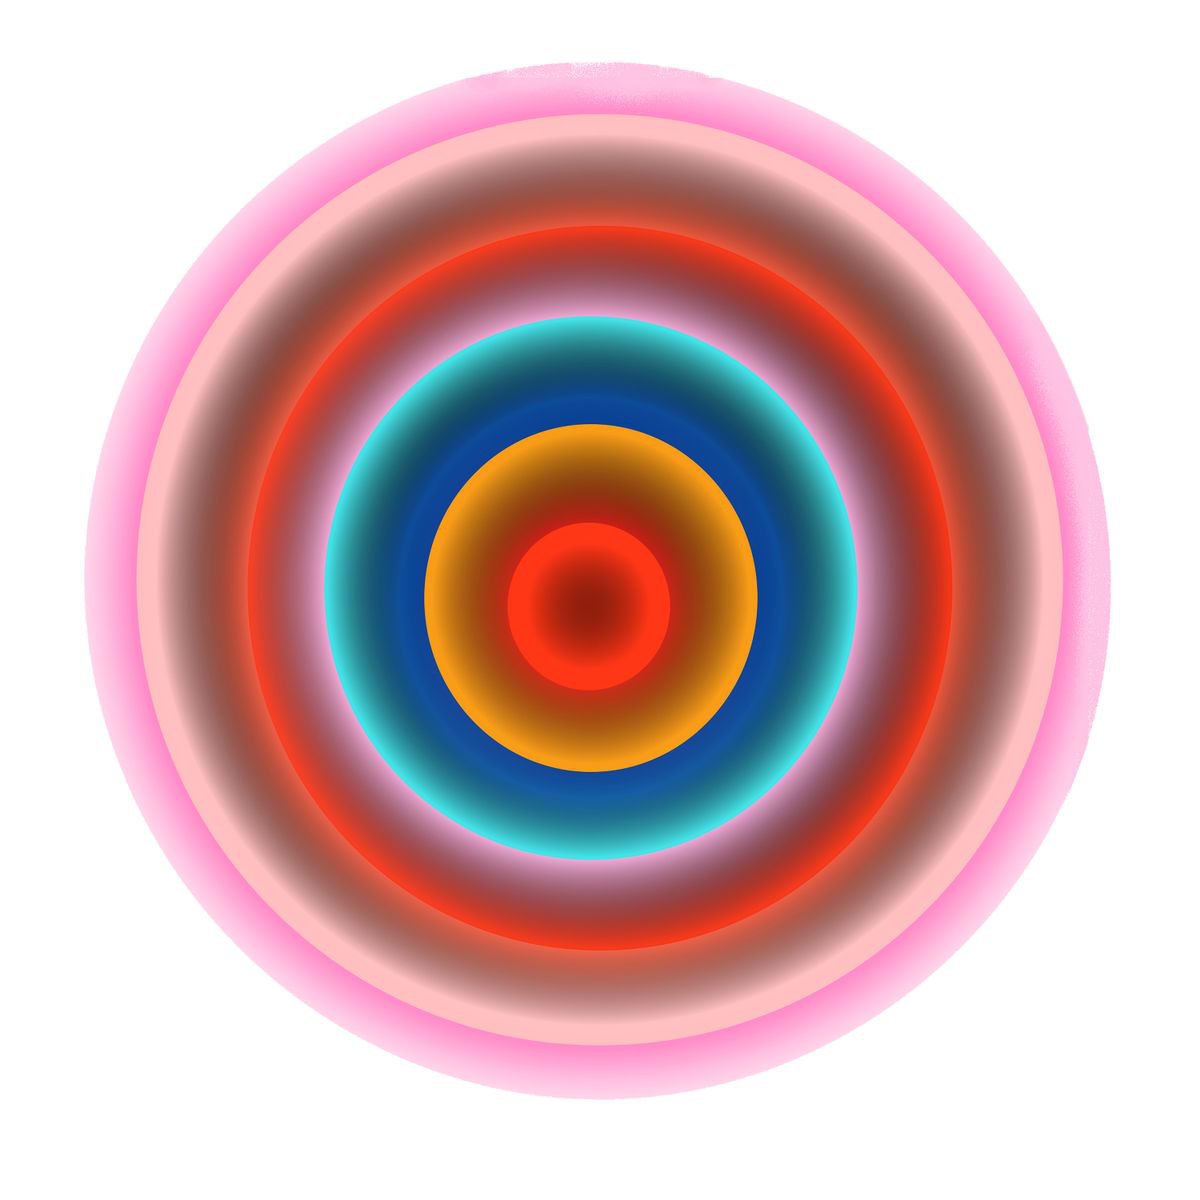 Glowing Circles VII. by Geert Lemmers FPA